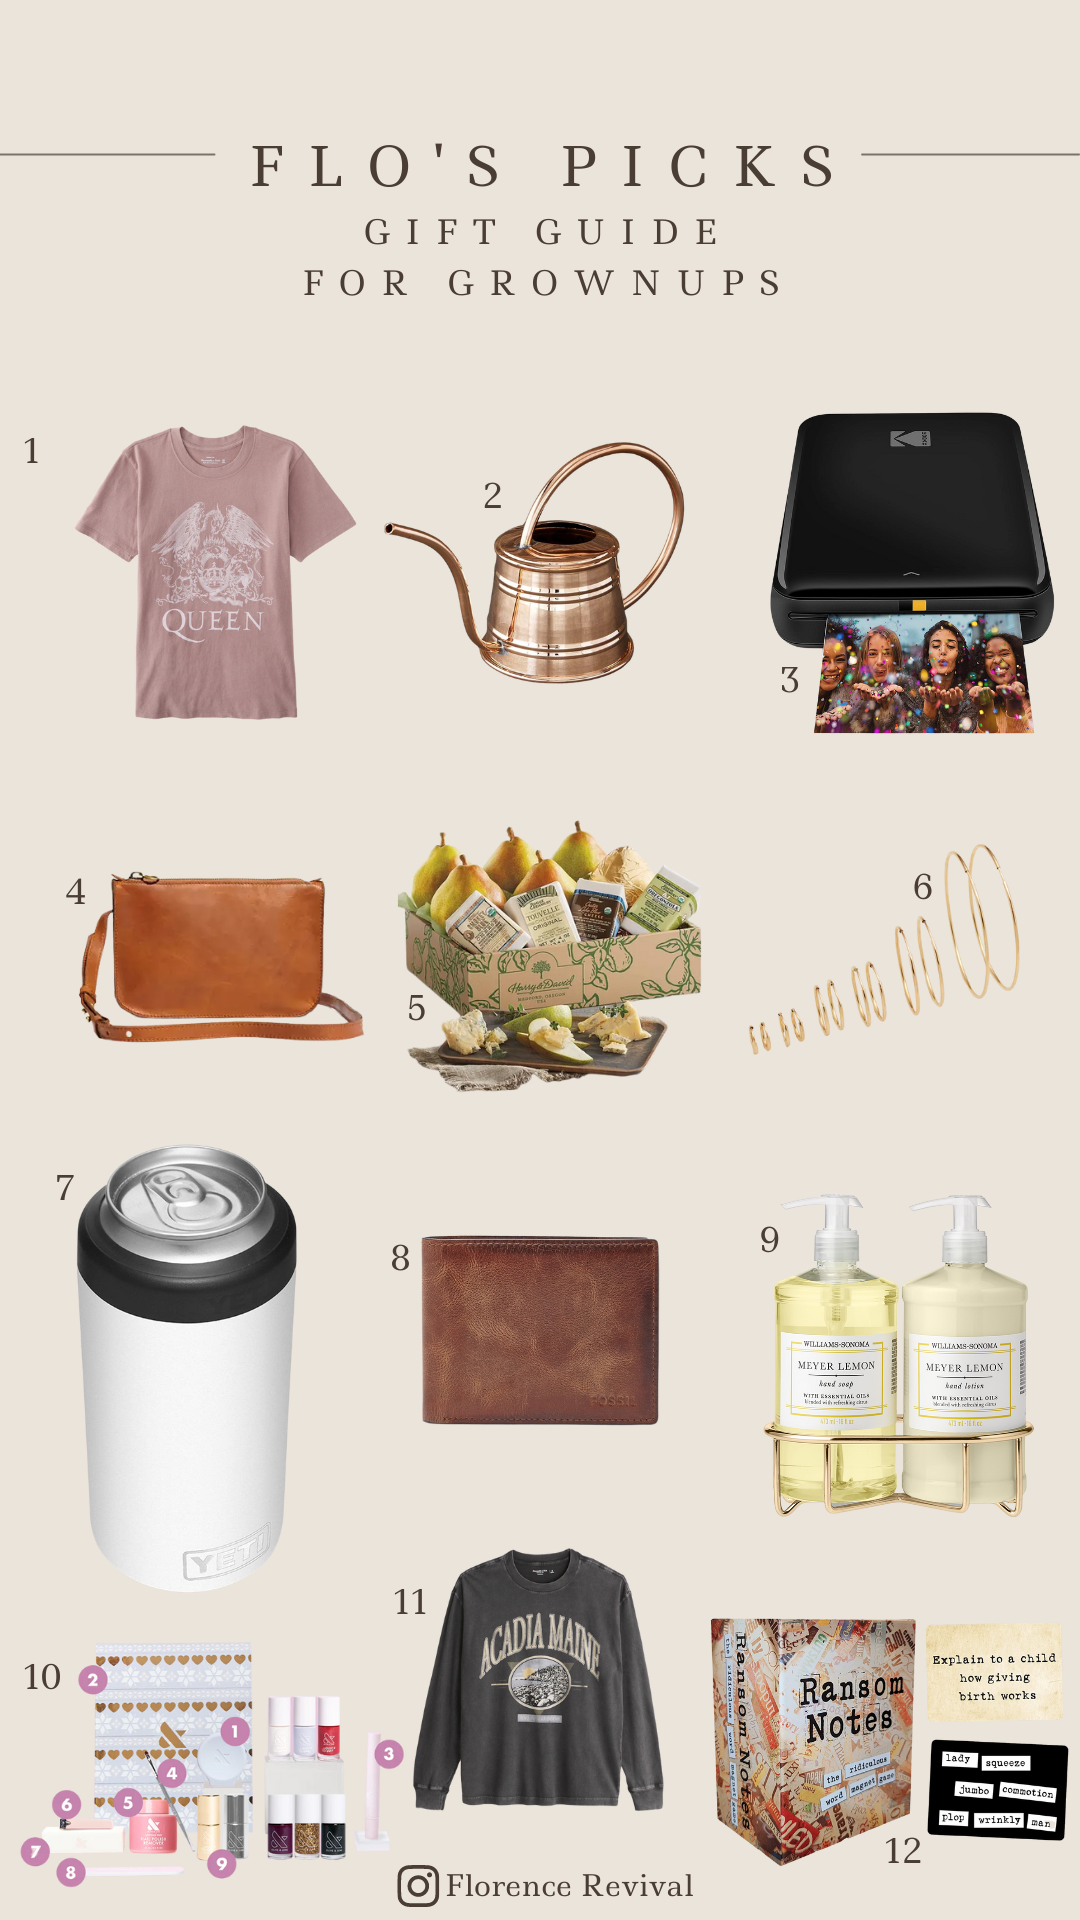 Katie's gift guide for grownups - listing 12 items that she recommends for adults.